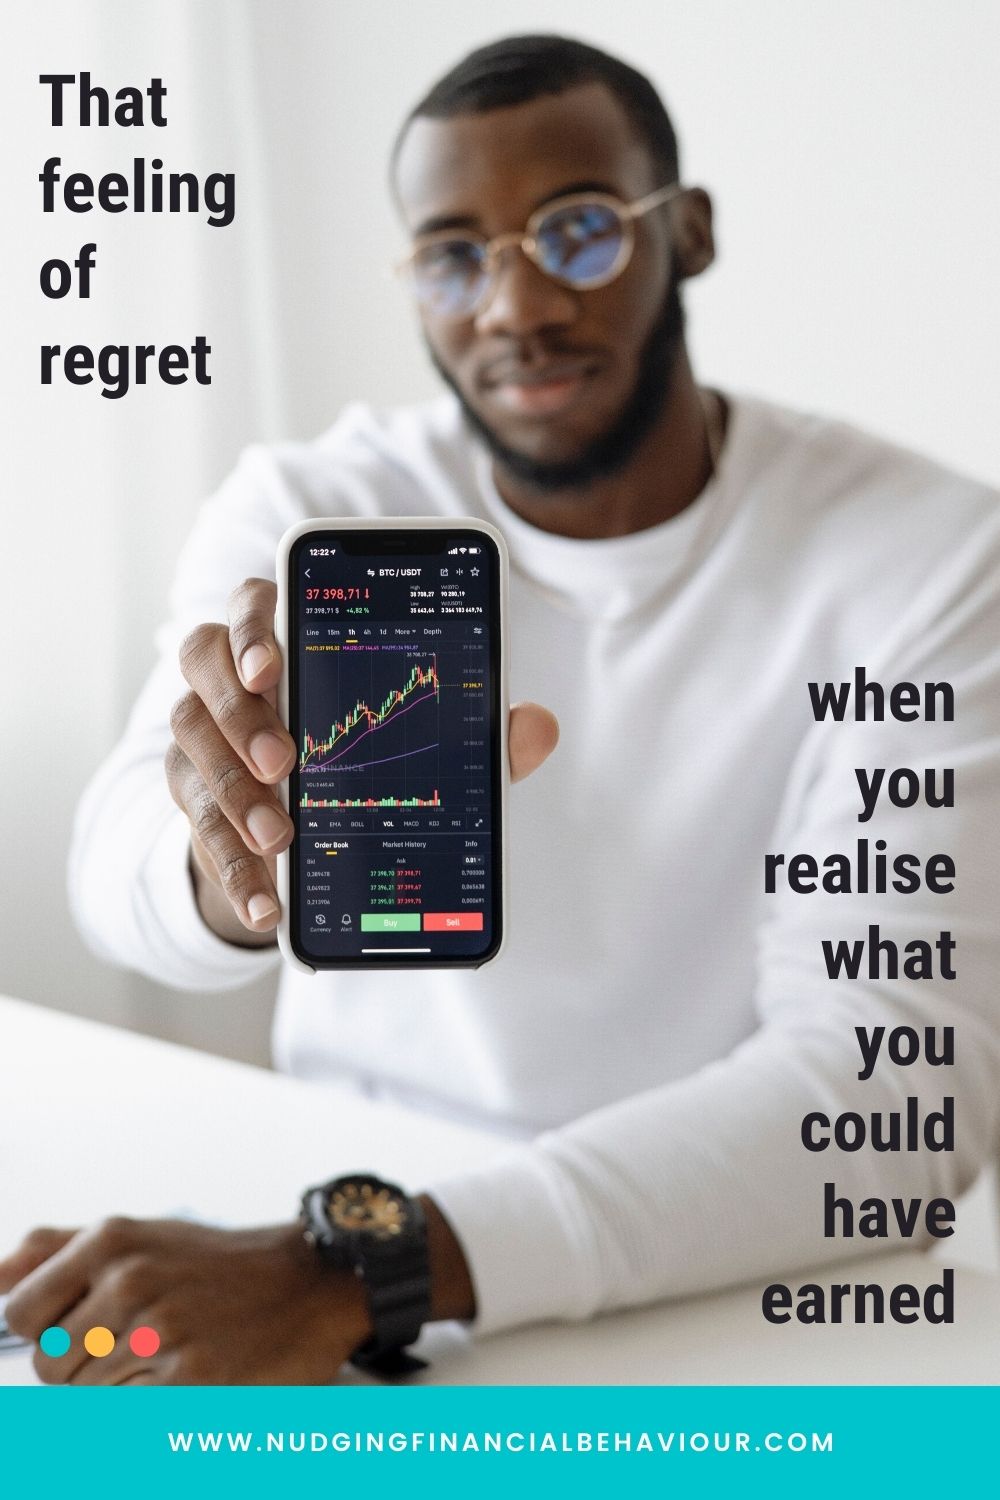 Regret avoidance and investment decisions